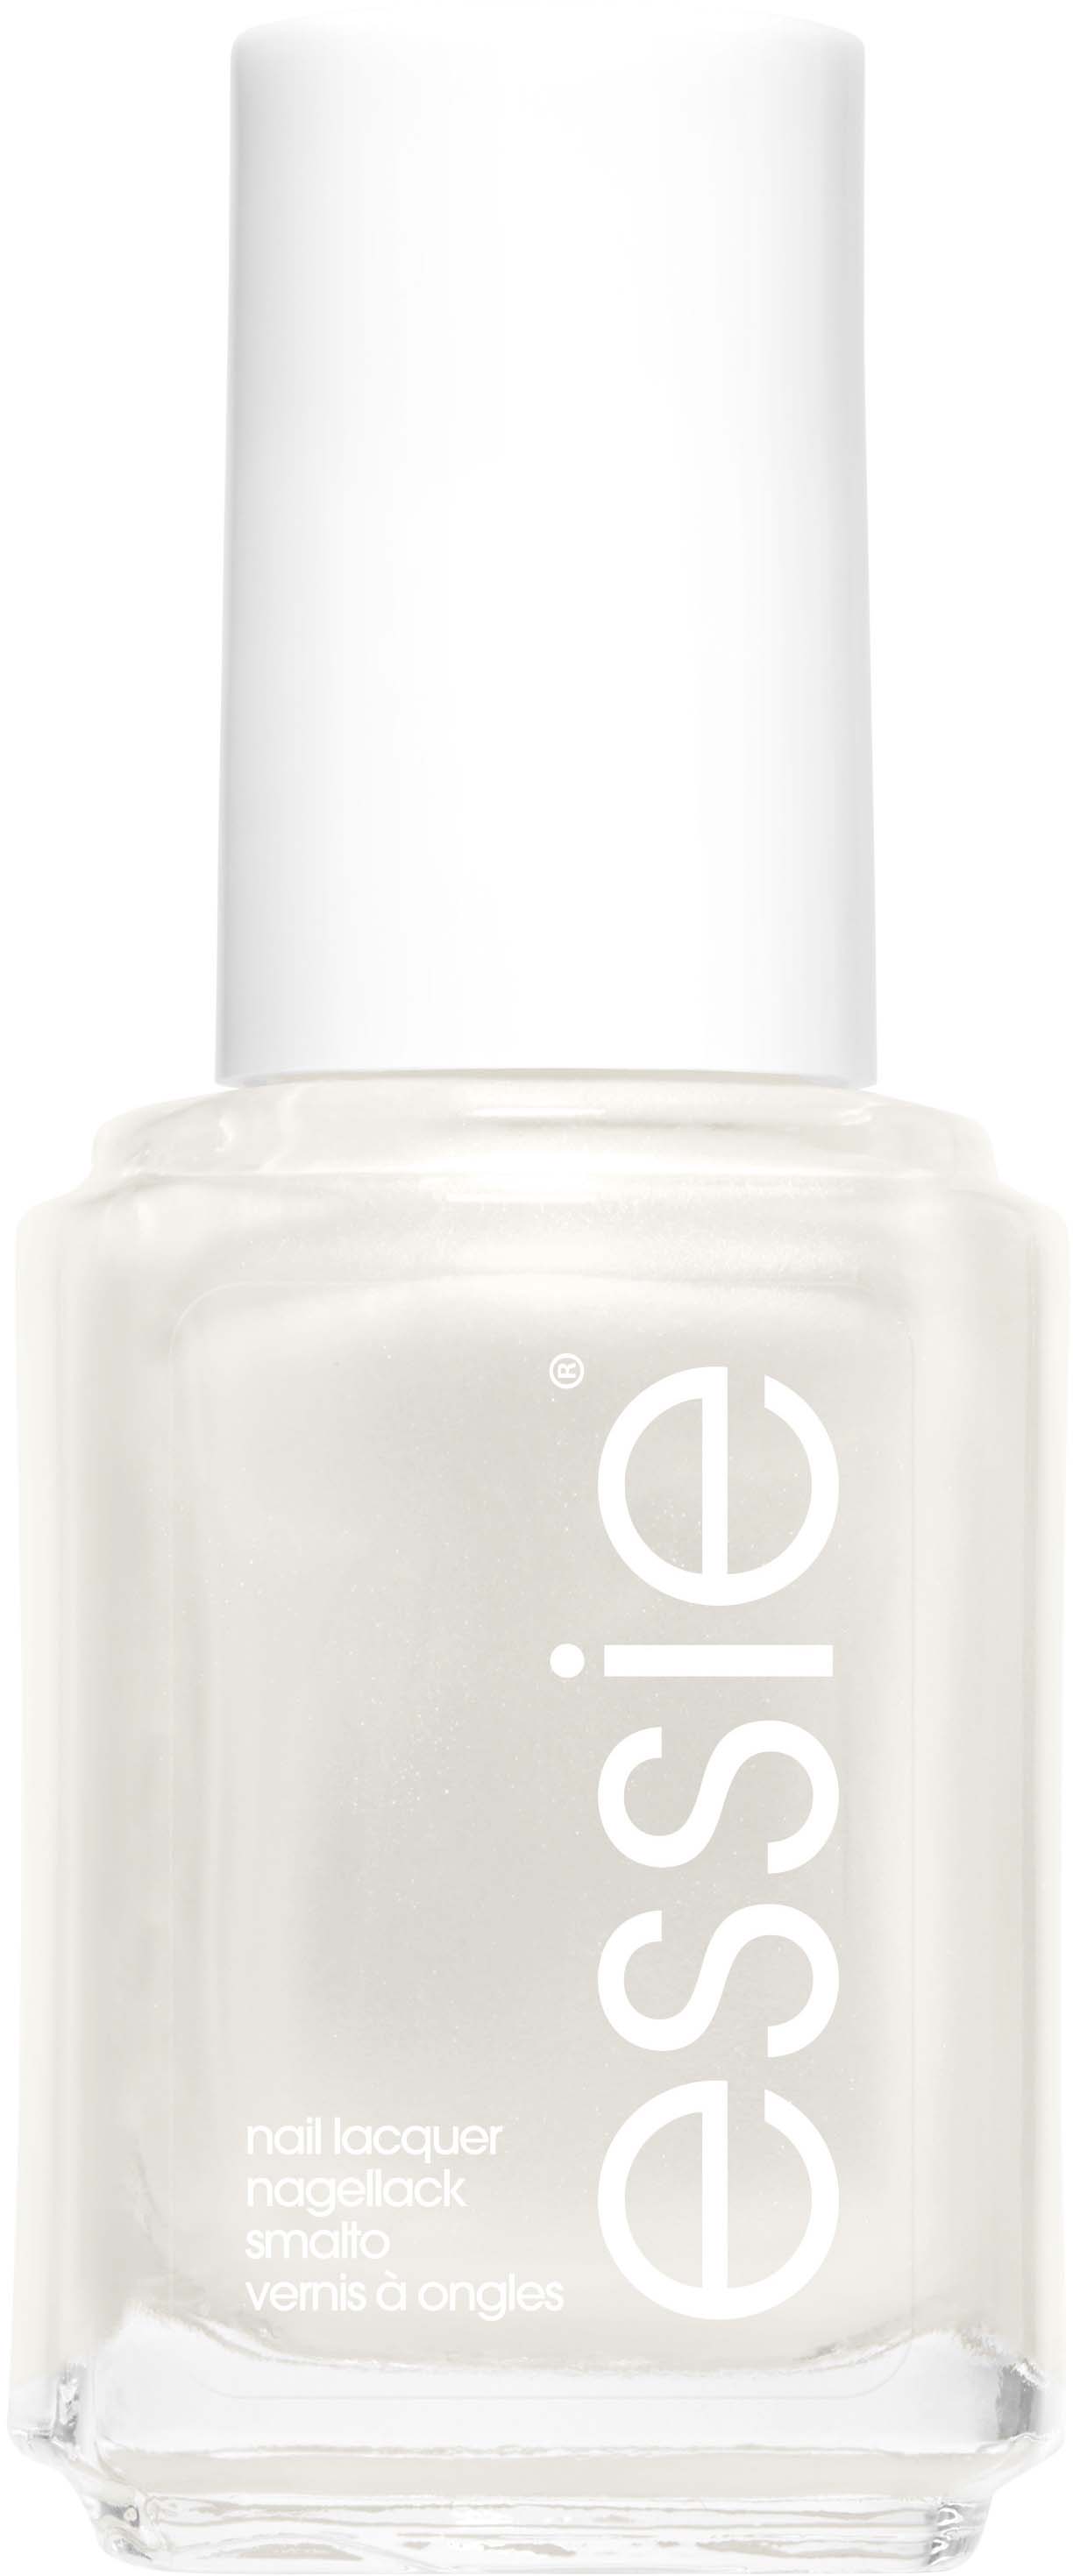 Nail Essie White Lacquer 04 Pearly